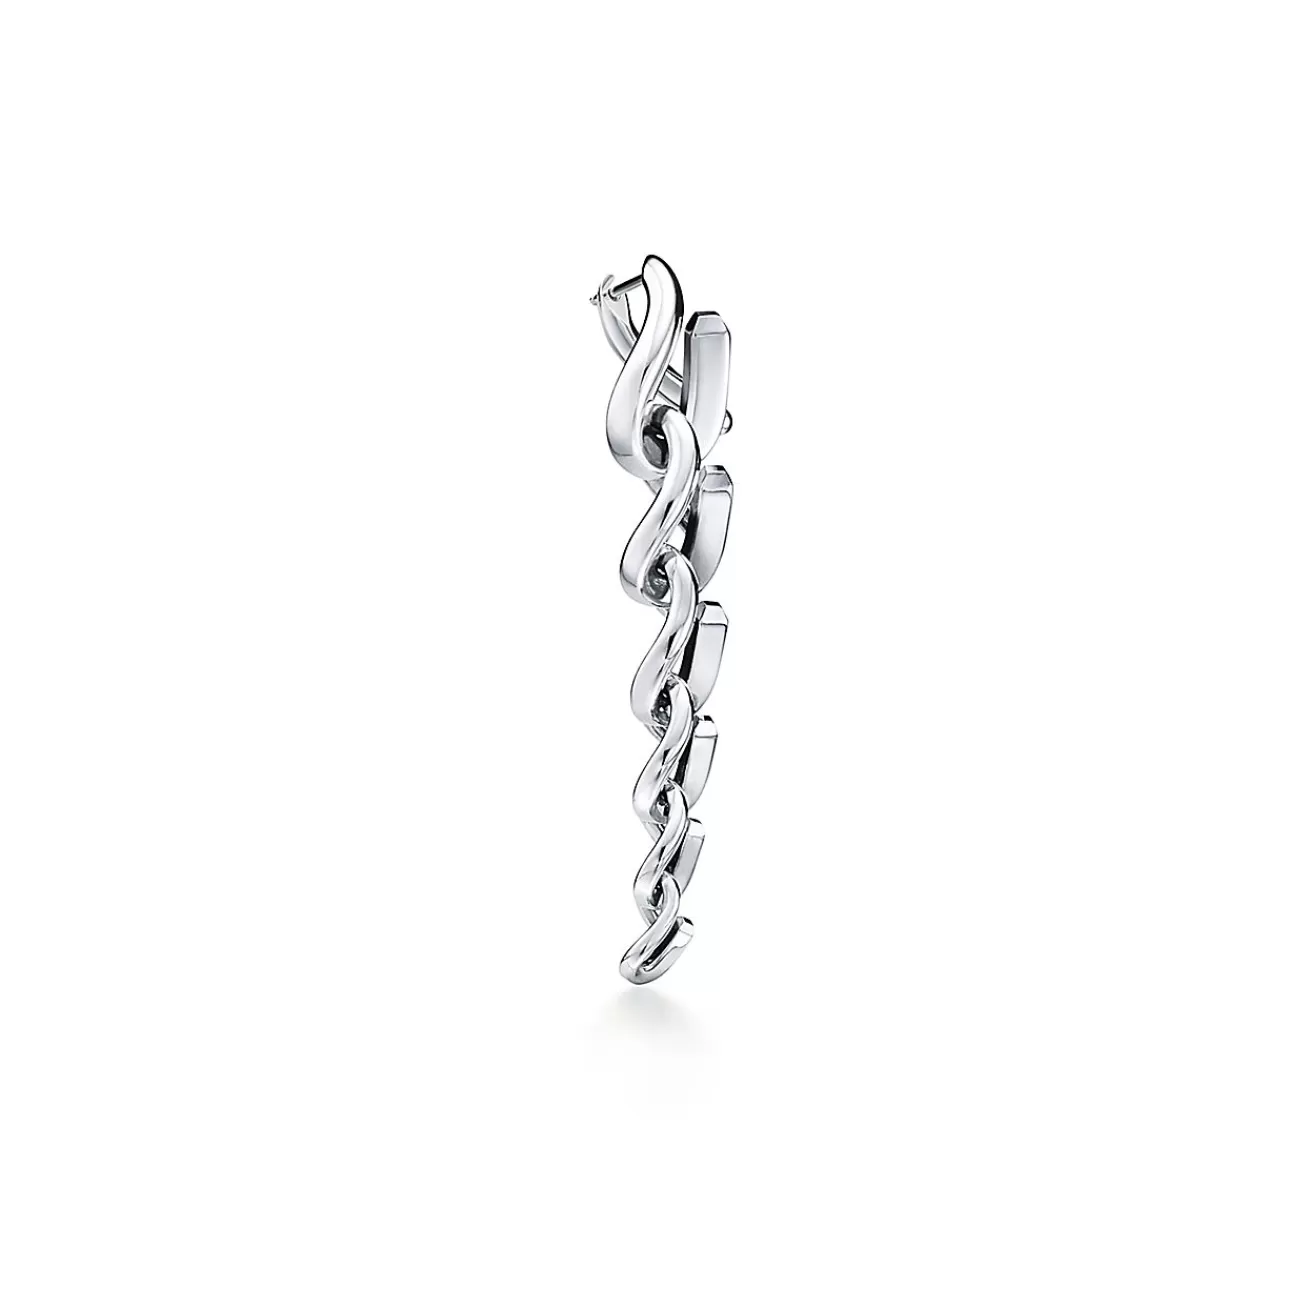 Tiffany & Co. Tiffany Forge Drop Link Earrings in High-polished Sterling Silver | ^ Earrings | New Jewelry